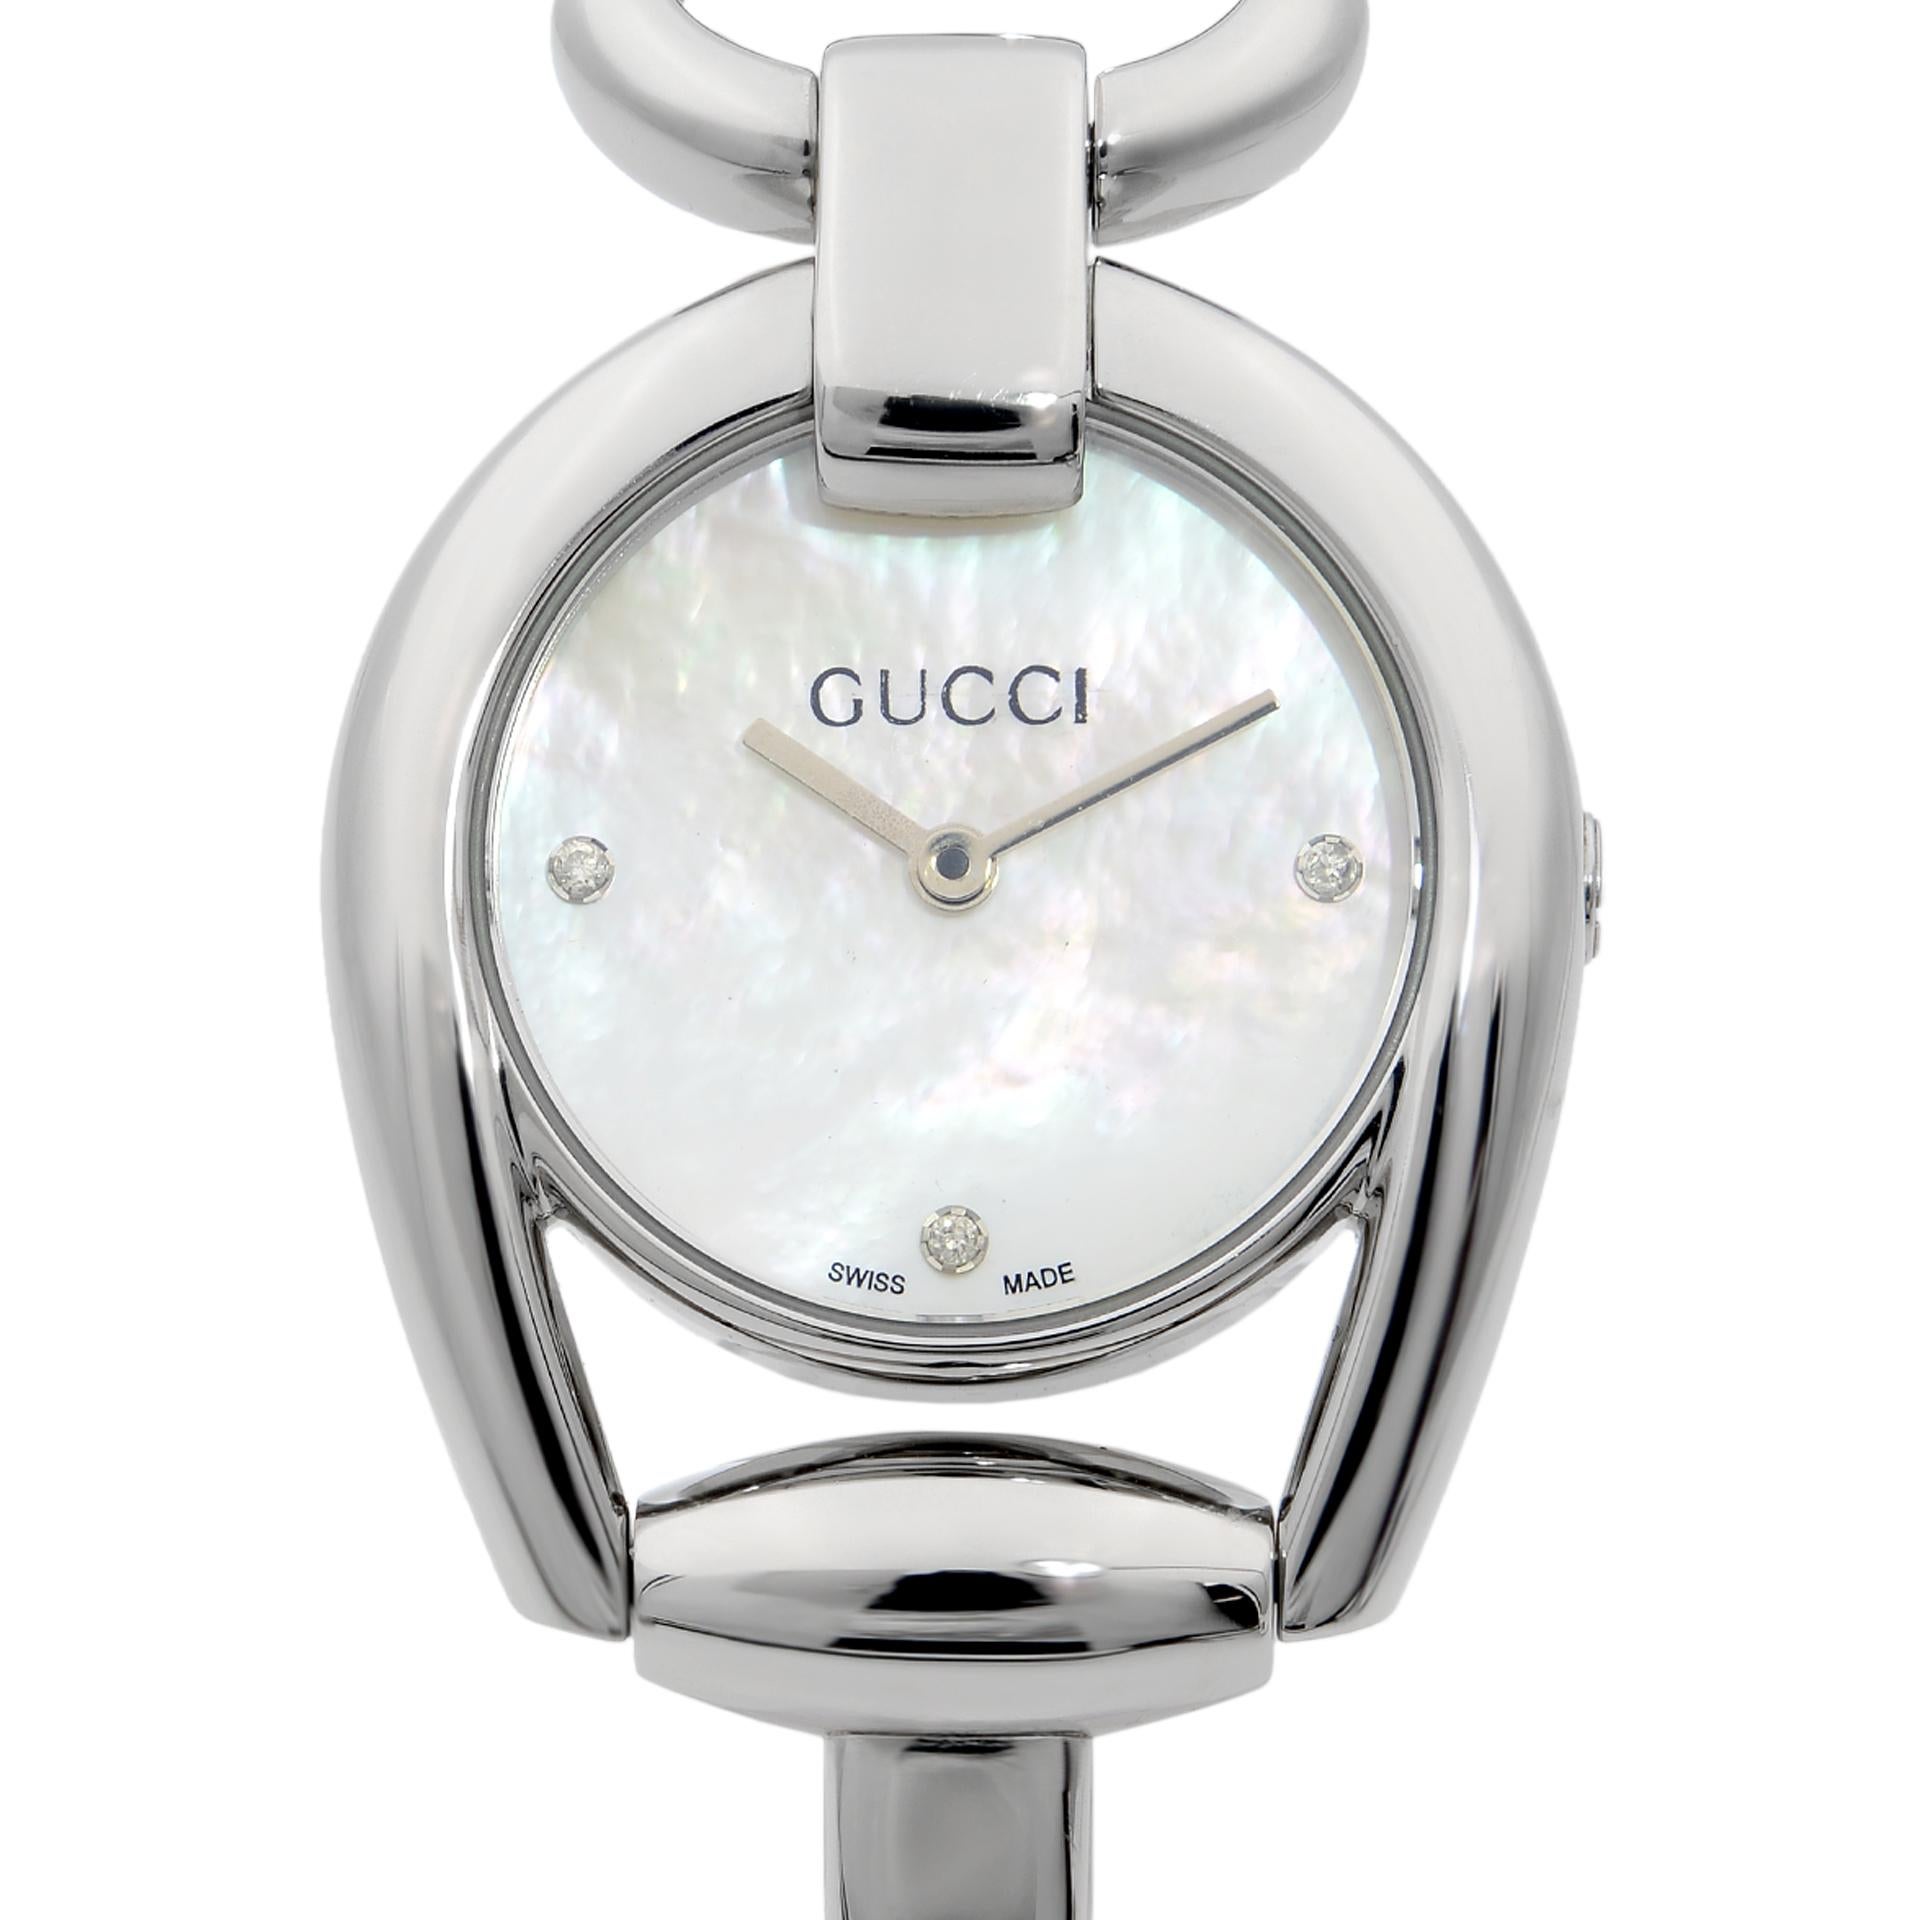 This pre-owned Gucci Horsebit  YA139506 is a beautiful Ladie's timepiece that is powered by quartz (battery) movement which is cased in a stainless steel case. It has a round shape face, no features dial and has hand unspecified style markers. It is